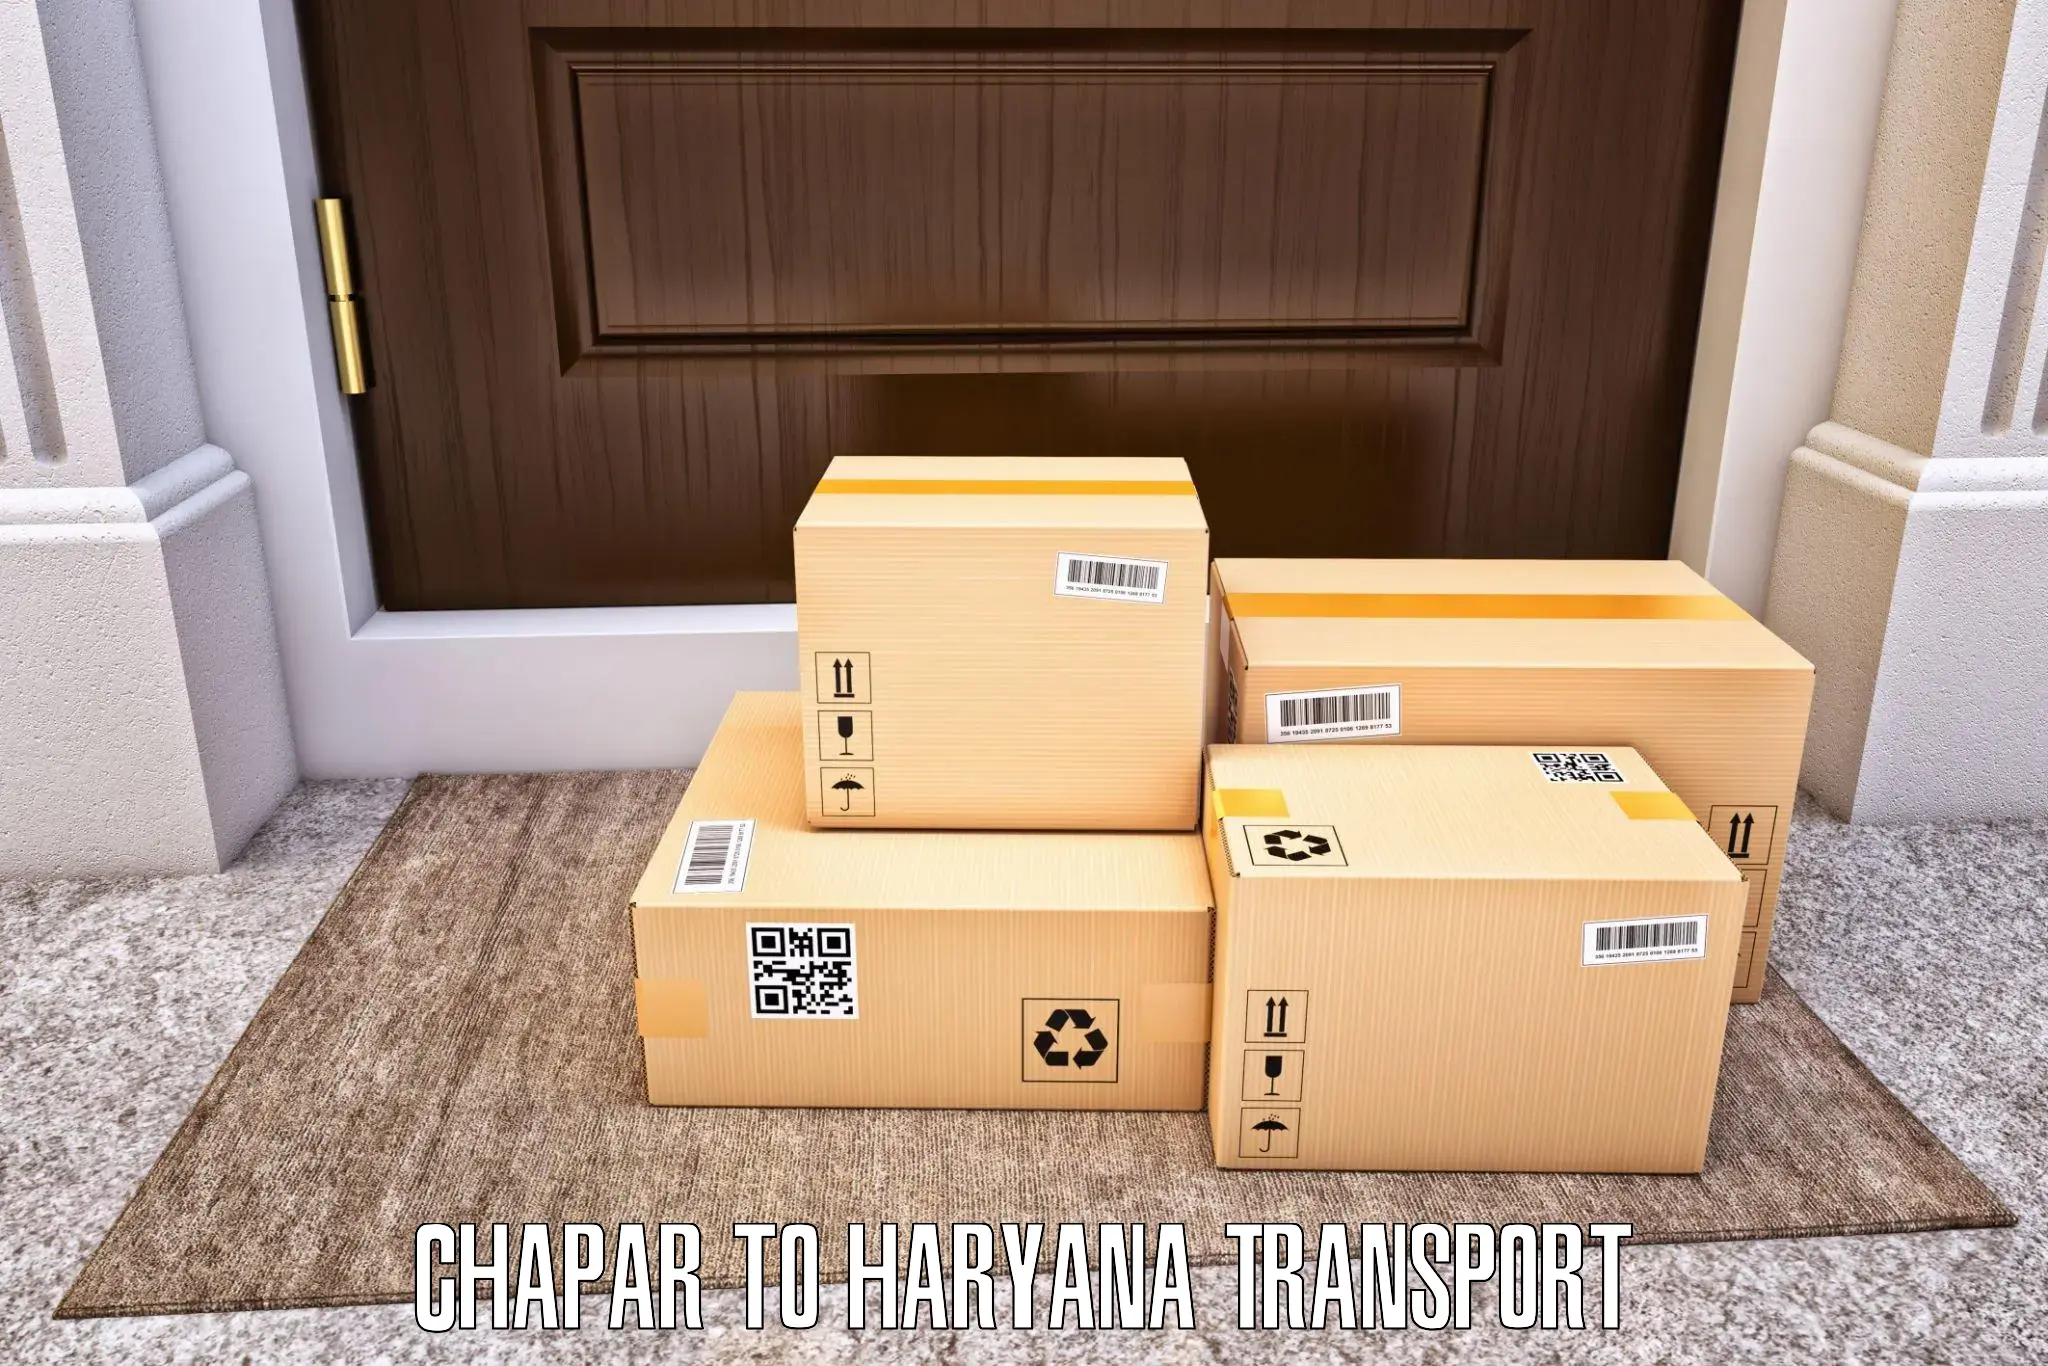 Nationwide transport services Chapar to Charkhari